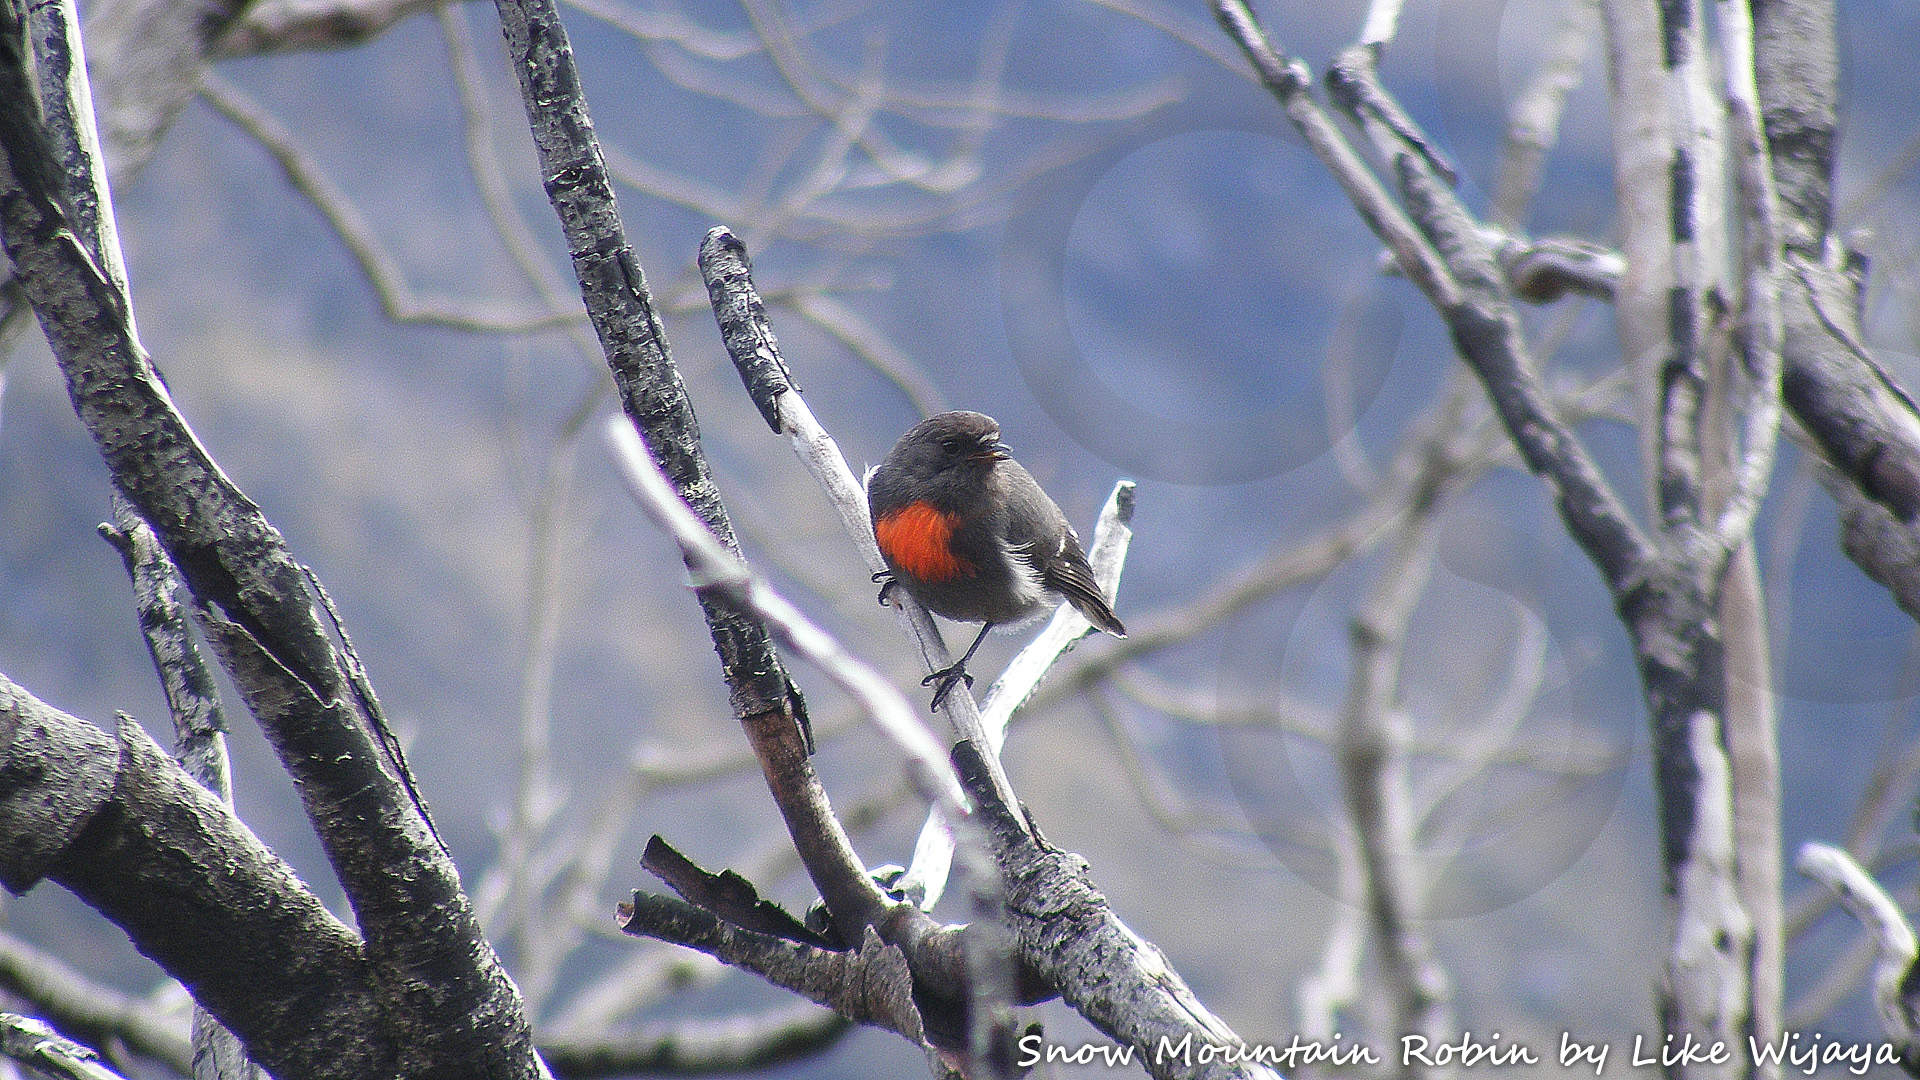 Snow Mountain Robin Petroica archboldi is one of four bird species that occur only in the Snow Mountains of West Papua or Indonesian New Guinea and nowhere else on Earth. This little gem appears to be genuinely confined to Peak Trikora or Wilhelmina and Peak Jaya or Carstenz, reliably setting in above 4,000 m elevation only. Copyright © Like Wijaya